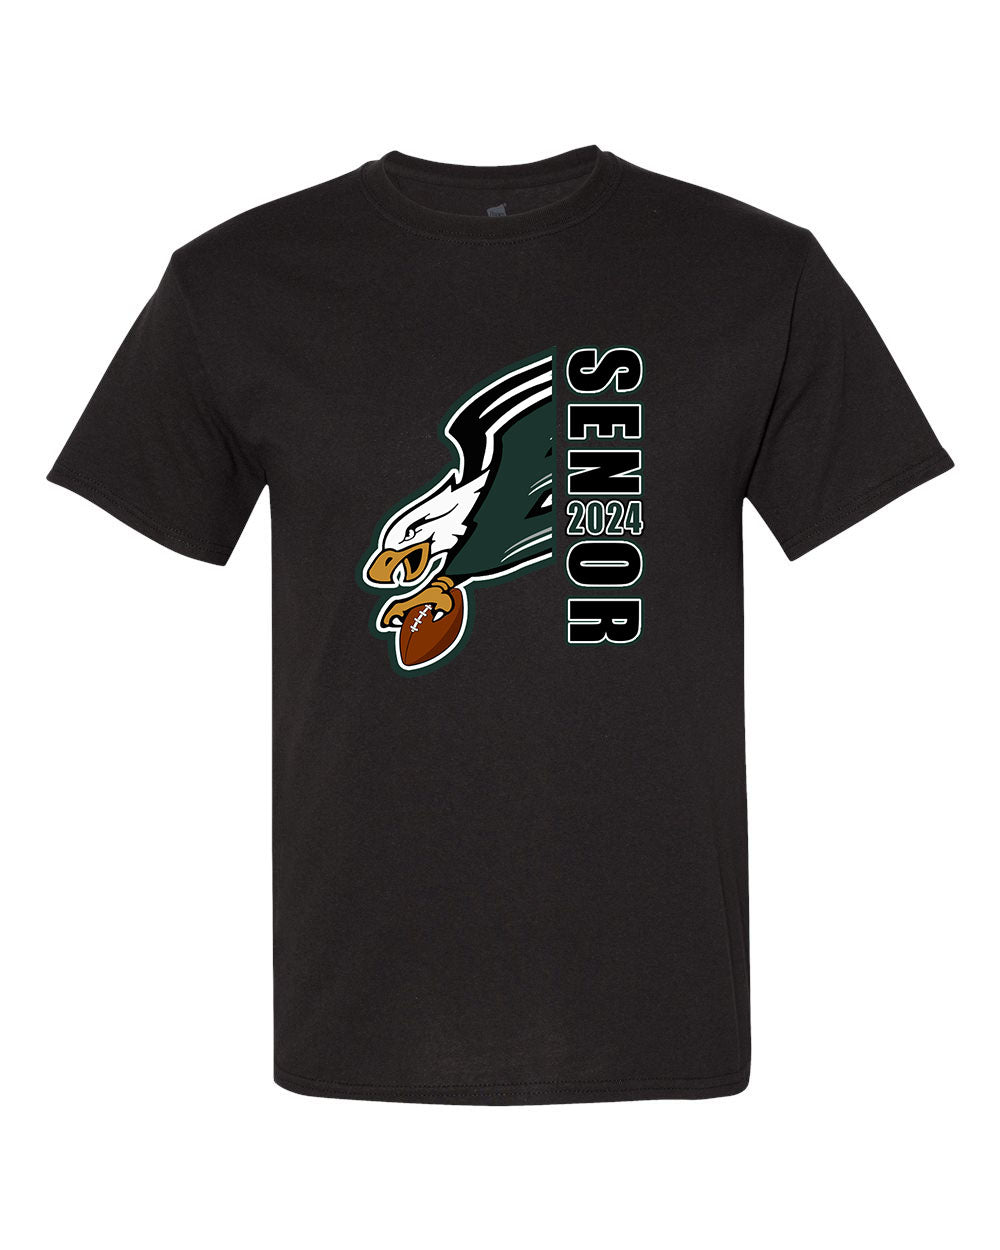 Enfield Eagles Football Adult T-Shirt 50/50 Blend "Senior" - 29MR (color options available)